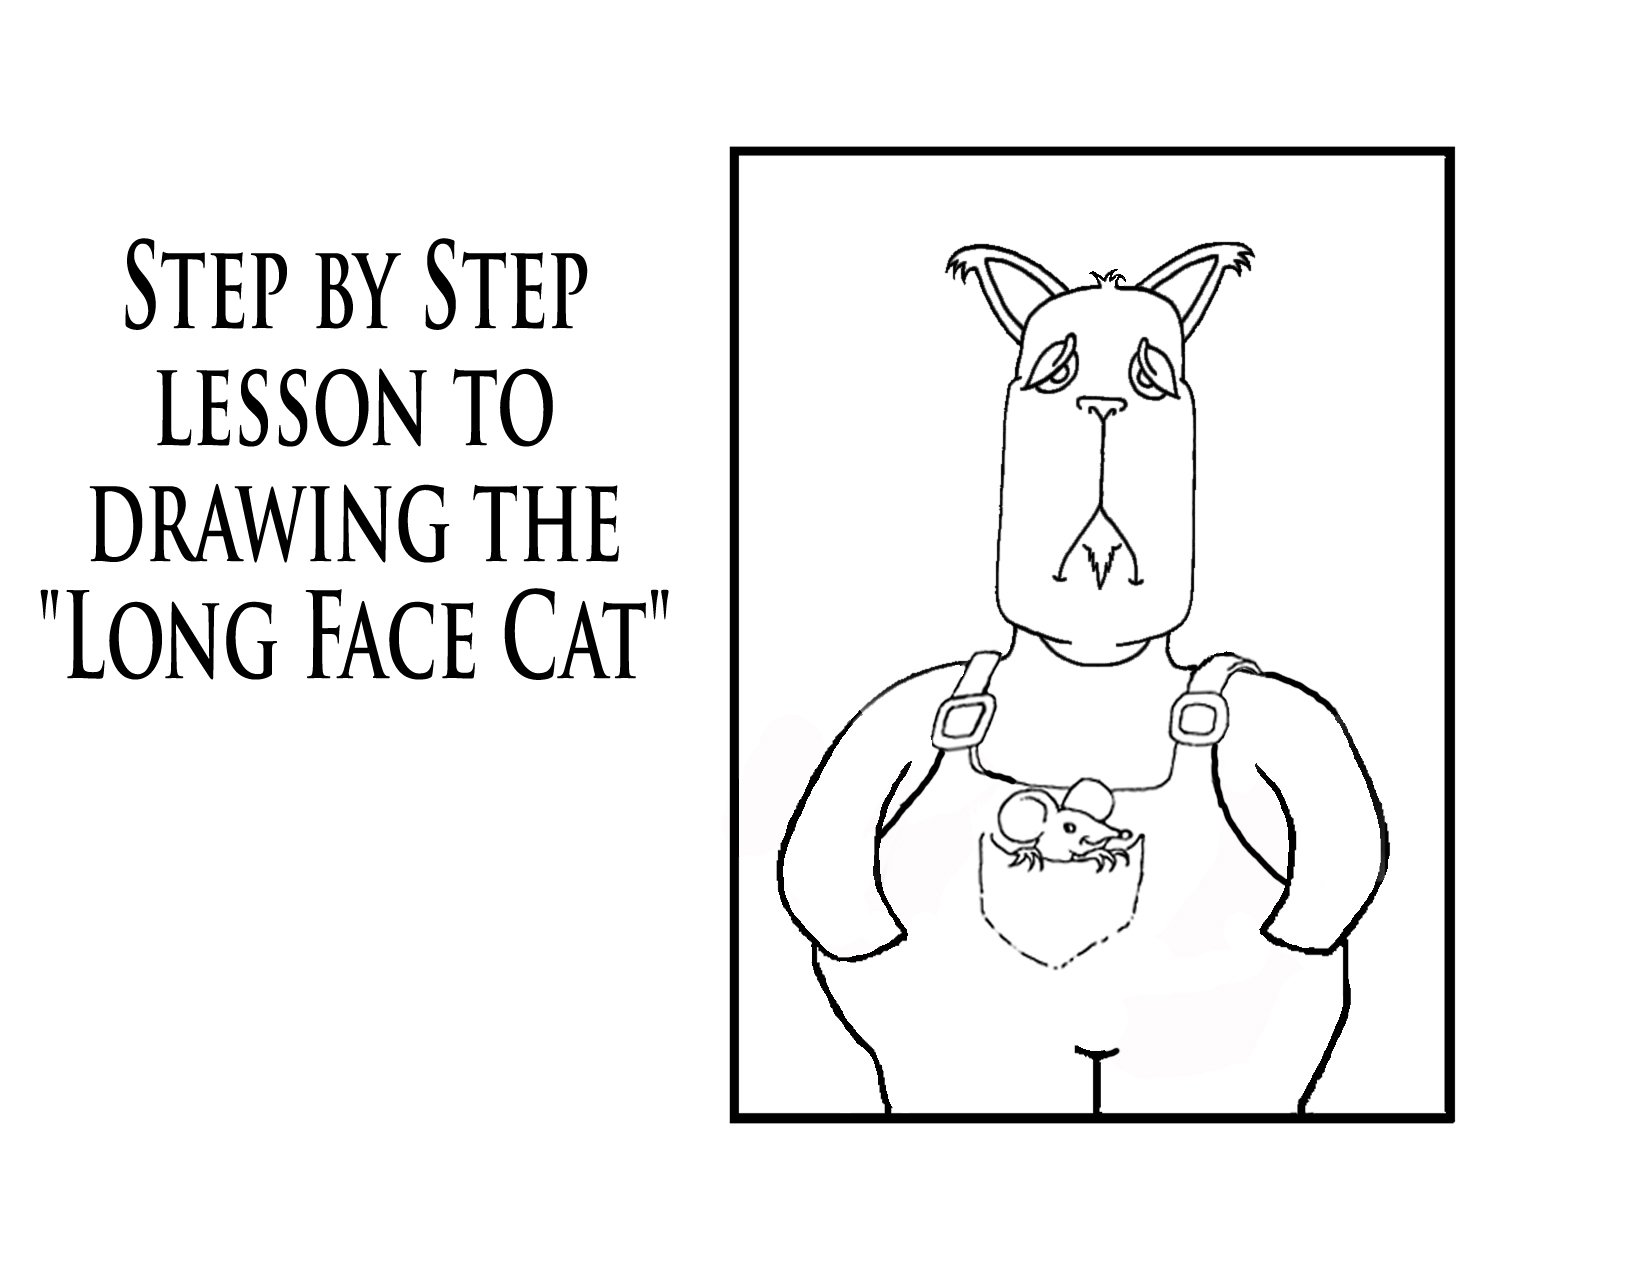 How to draw a long face cat.